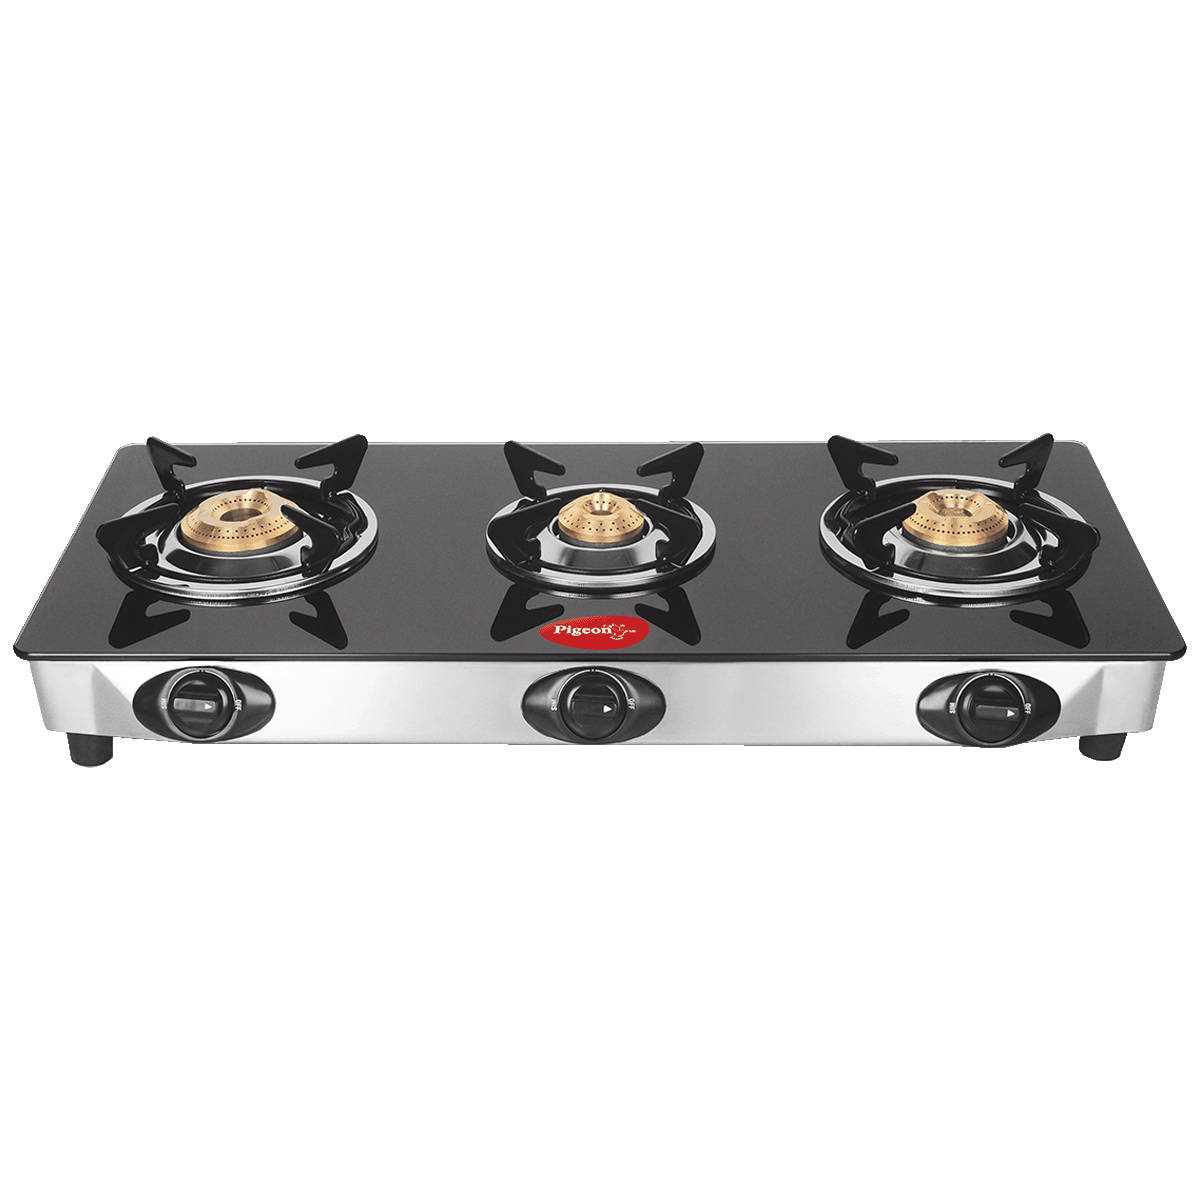 Pigeon Ayush 3 Burner Toughened Glass Gas Stove (Unique Pan Support, 14336, Black)_1